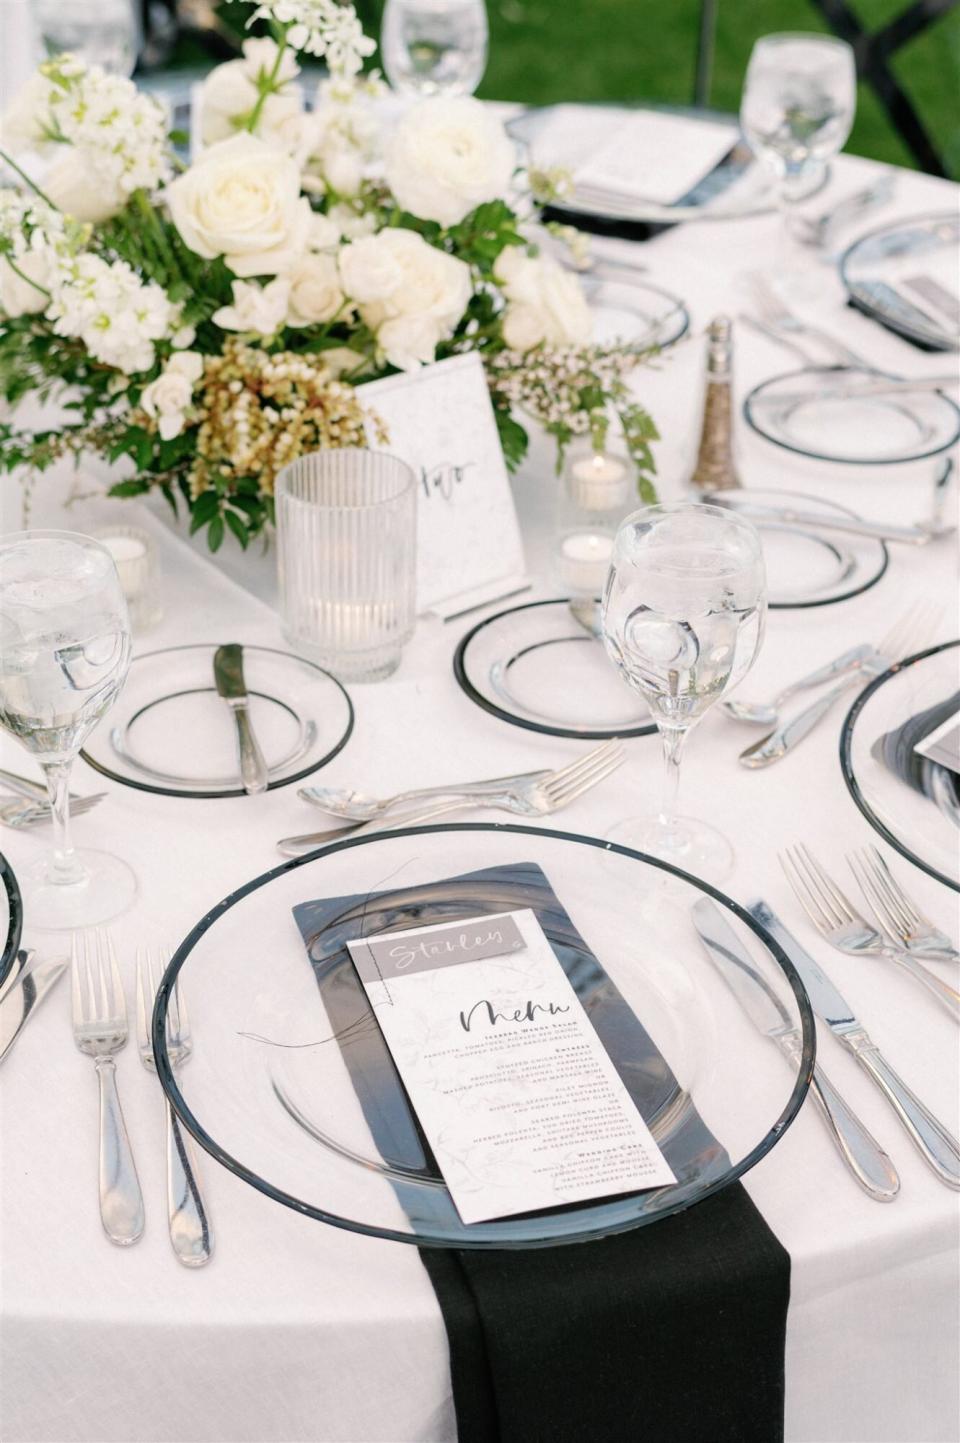 place settings with clear chargers